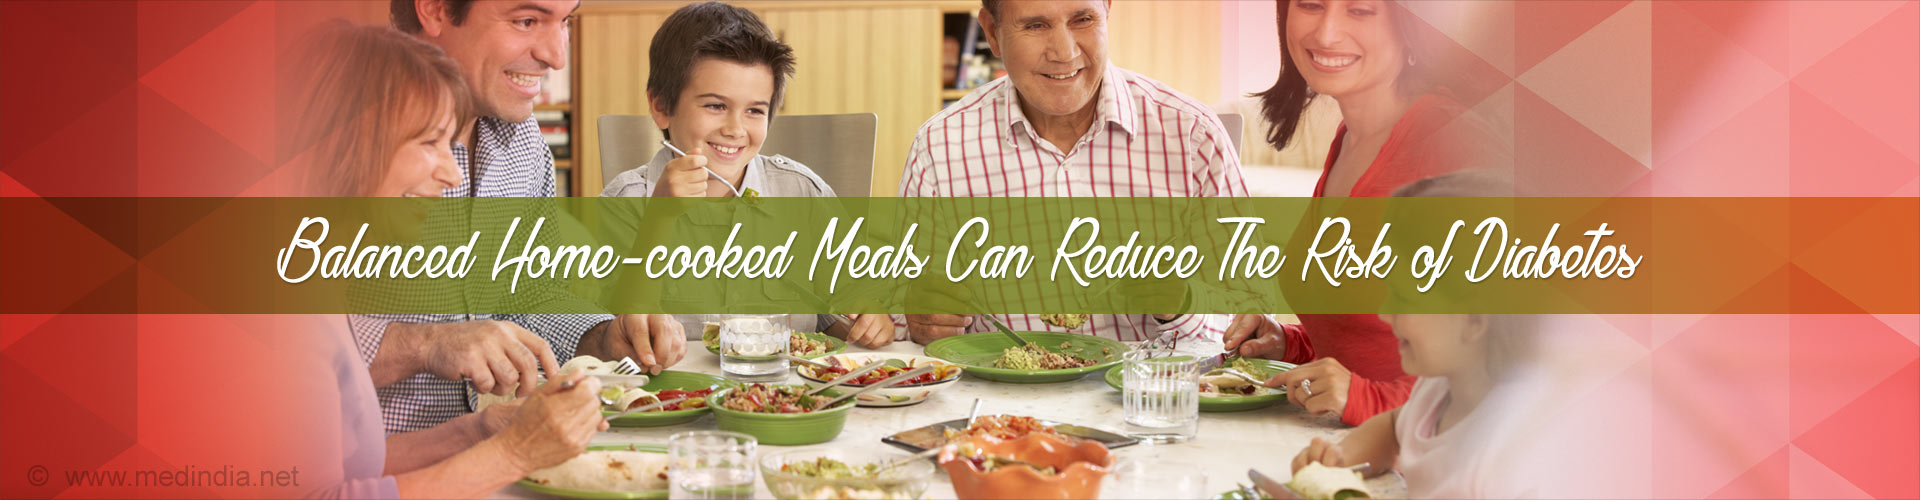 Balanced Home-cooked Meals Can Reduce The Risk of Diabetes